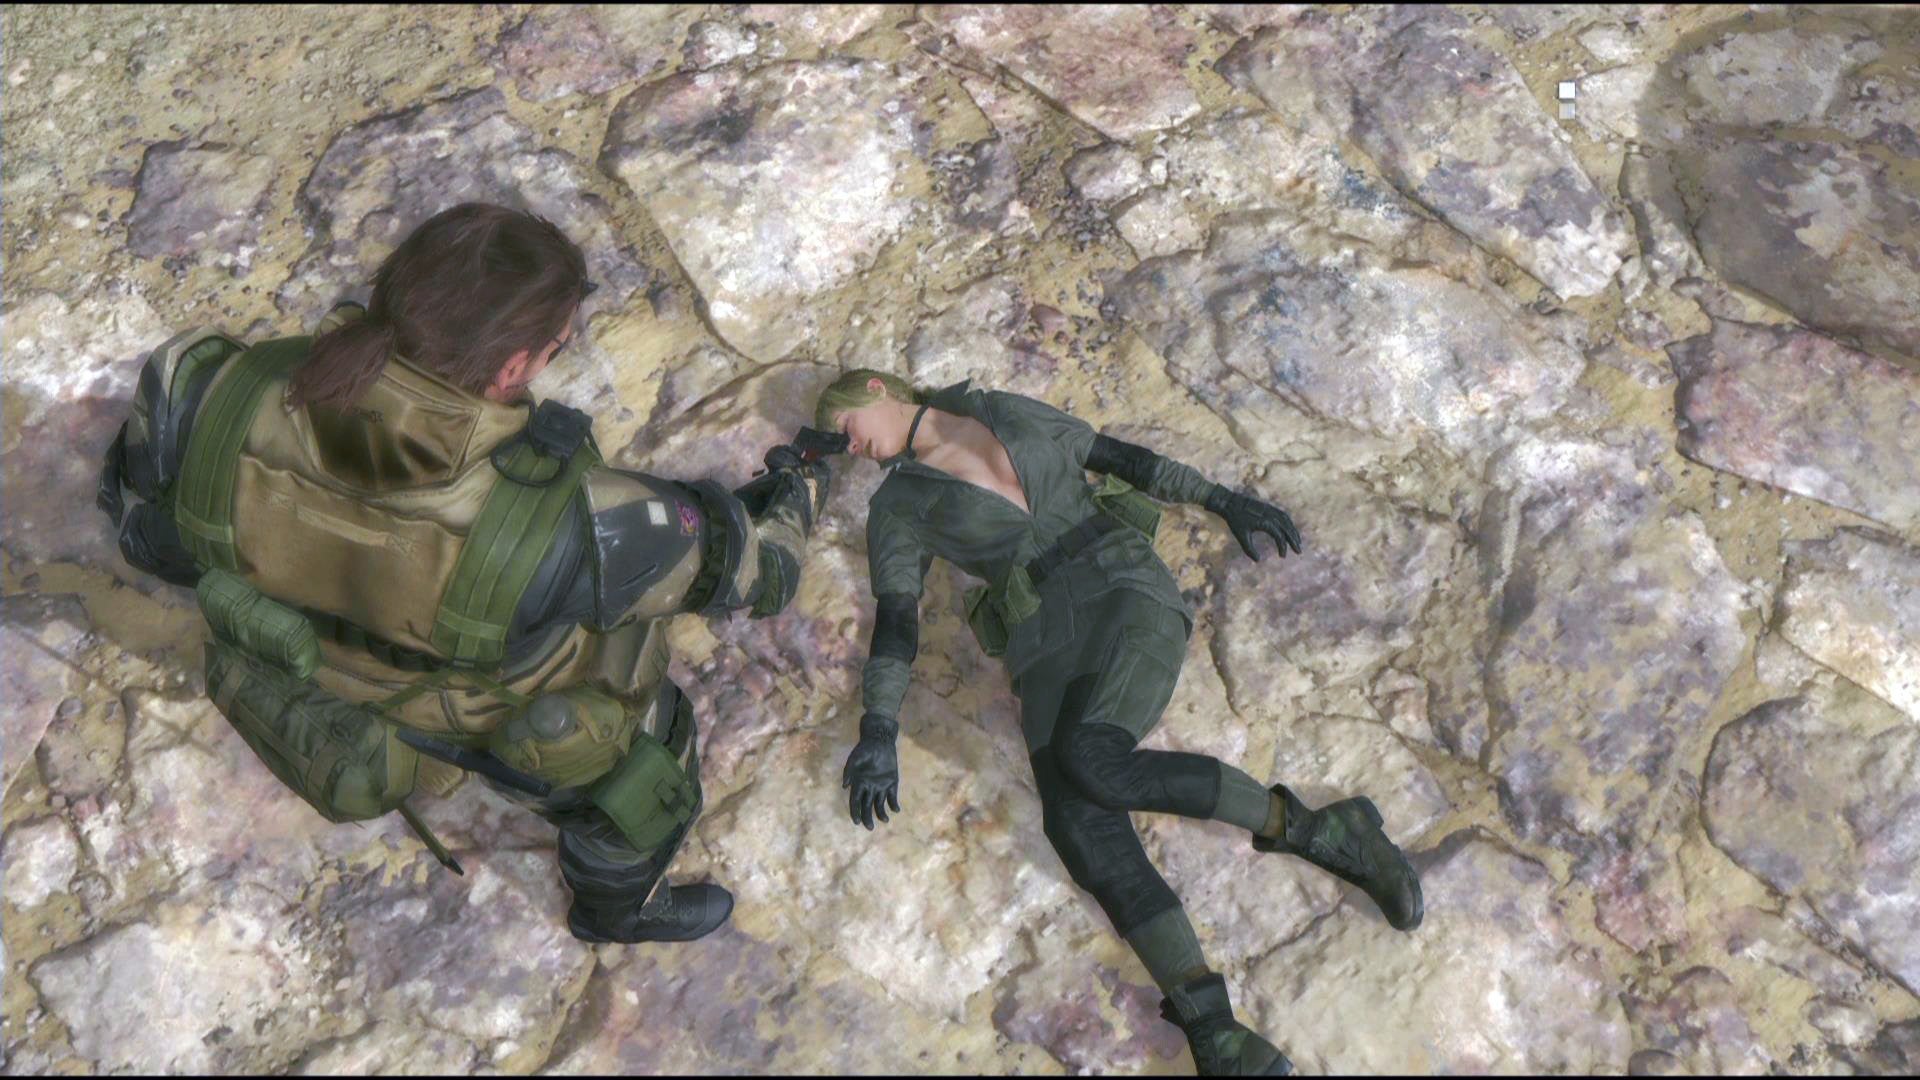 metal gear solid 5 save location cracked